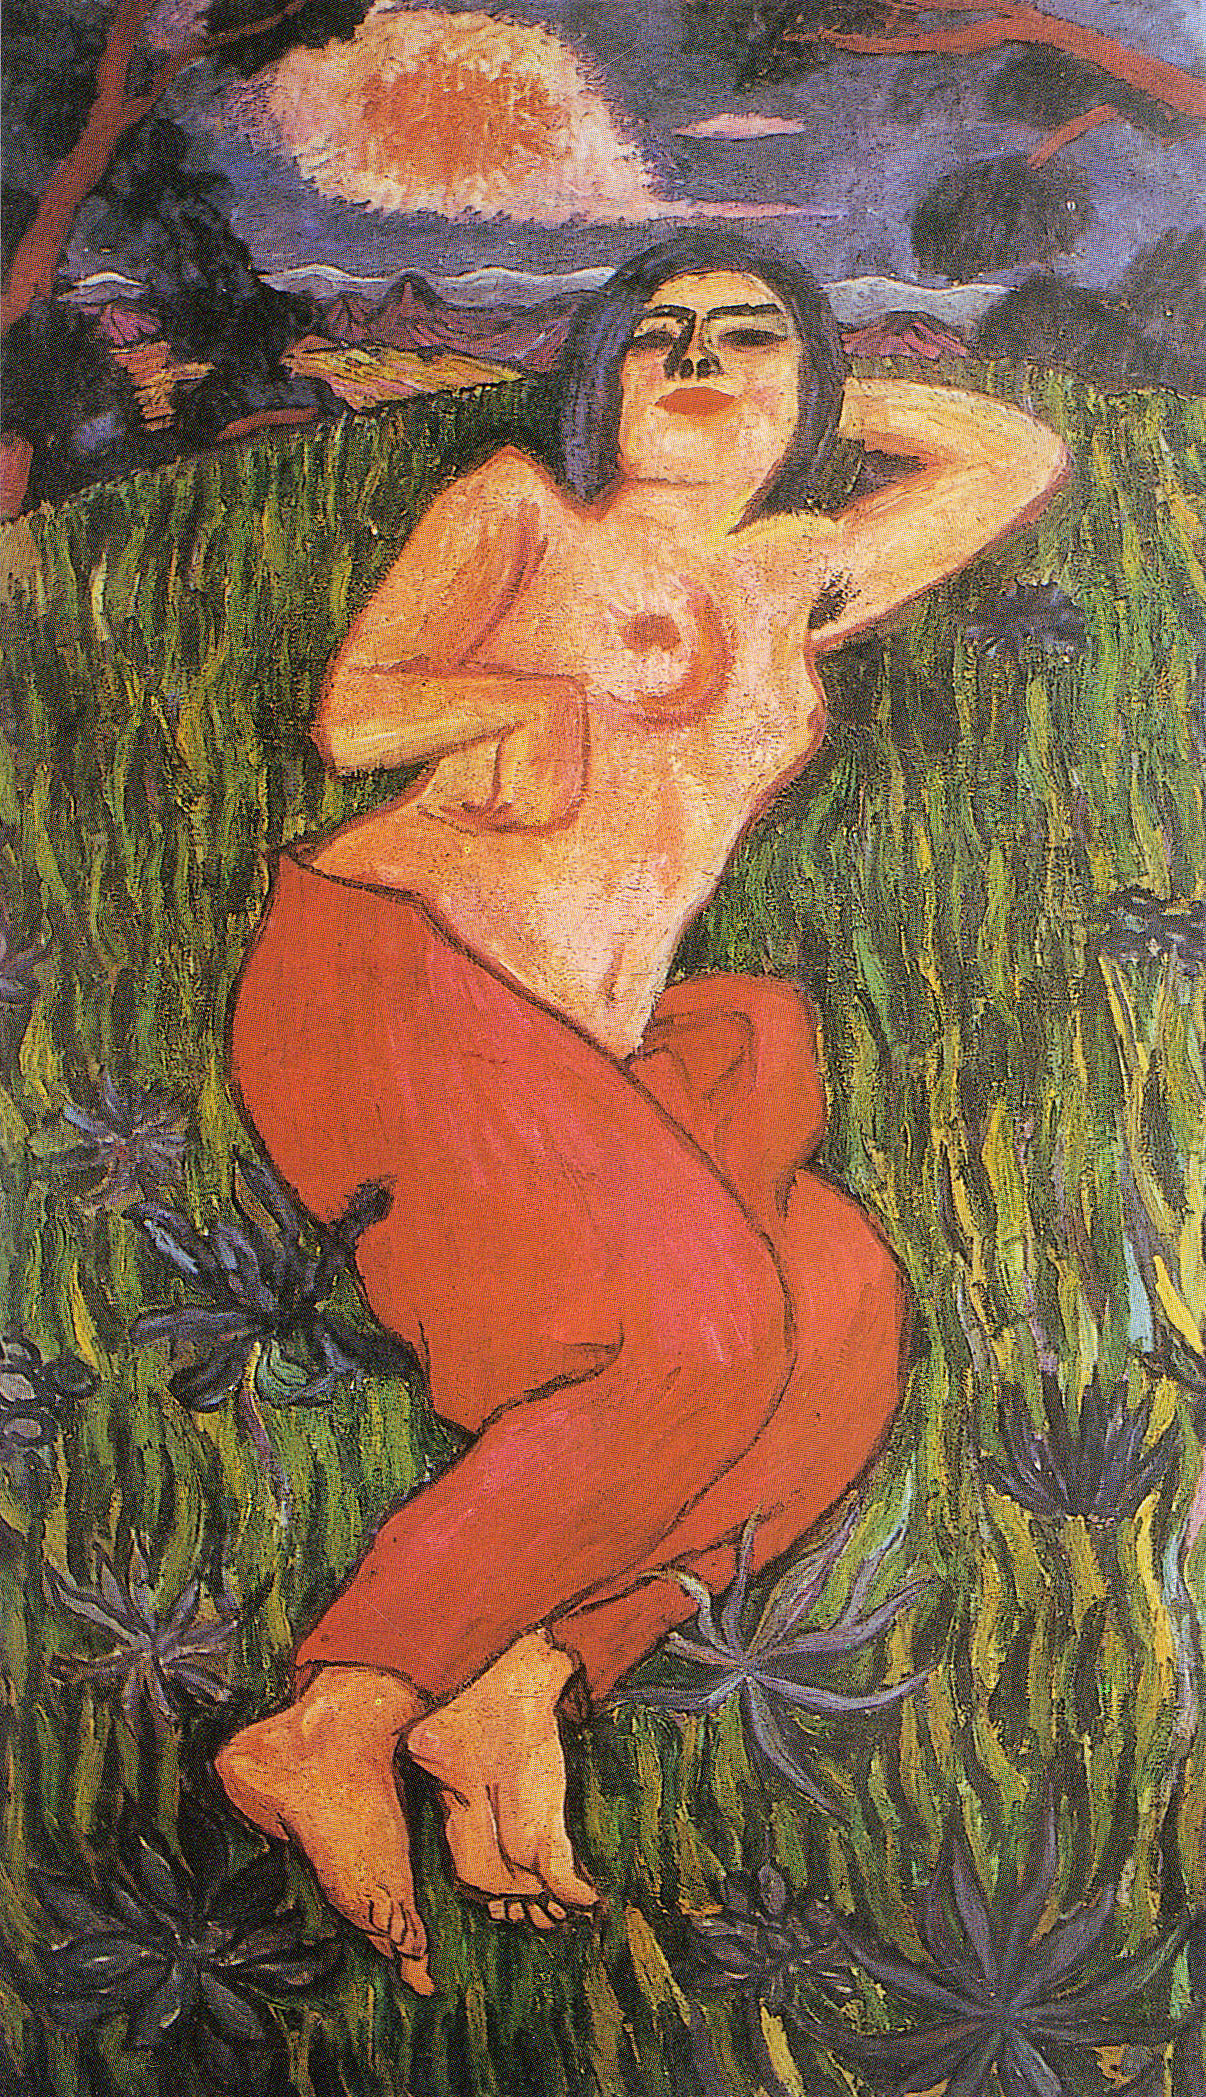 A woman lies in a field of flowers, with a red cloth covering her from hips to ankles.